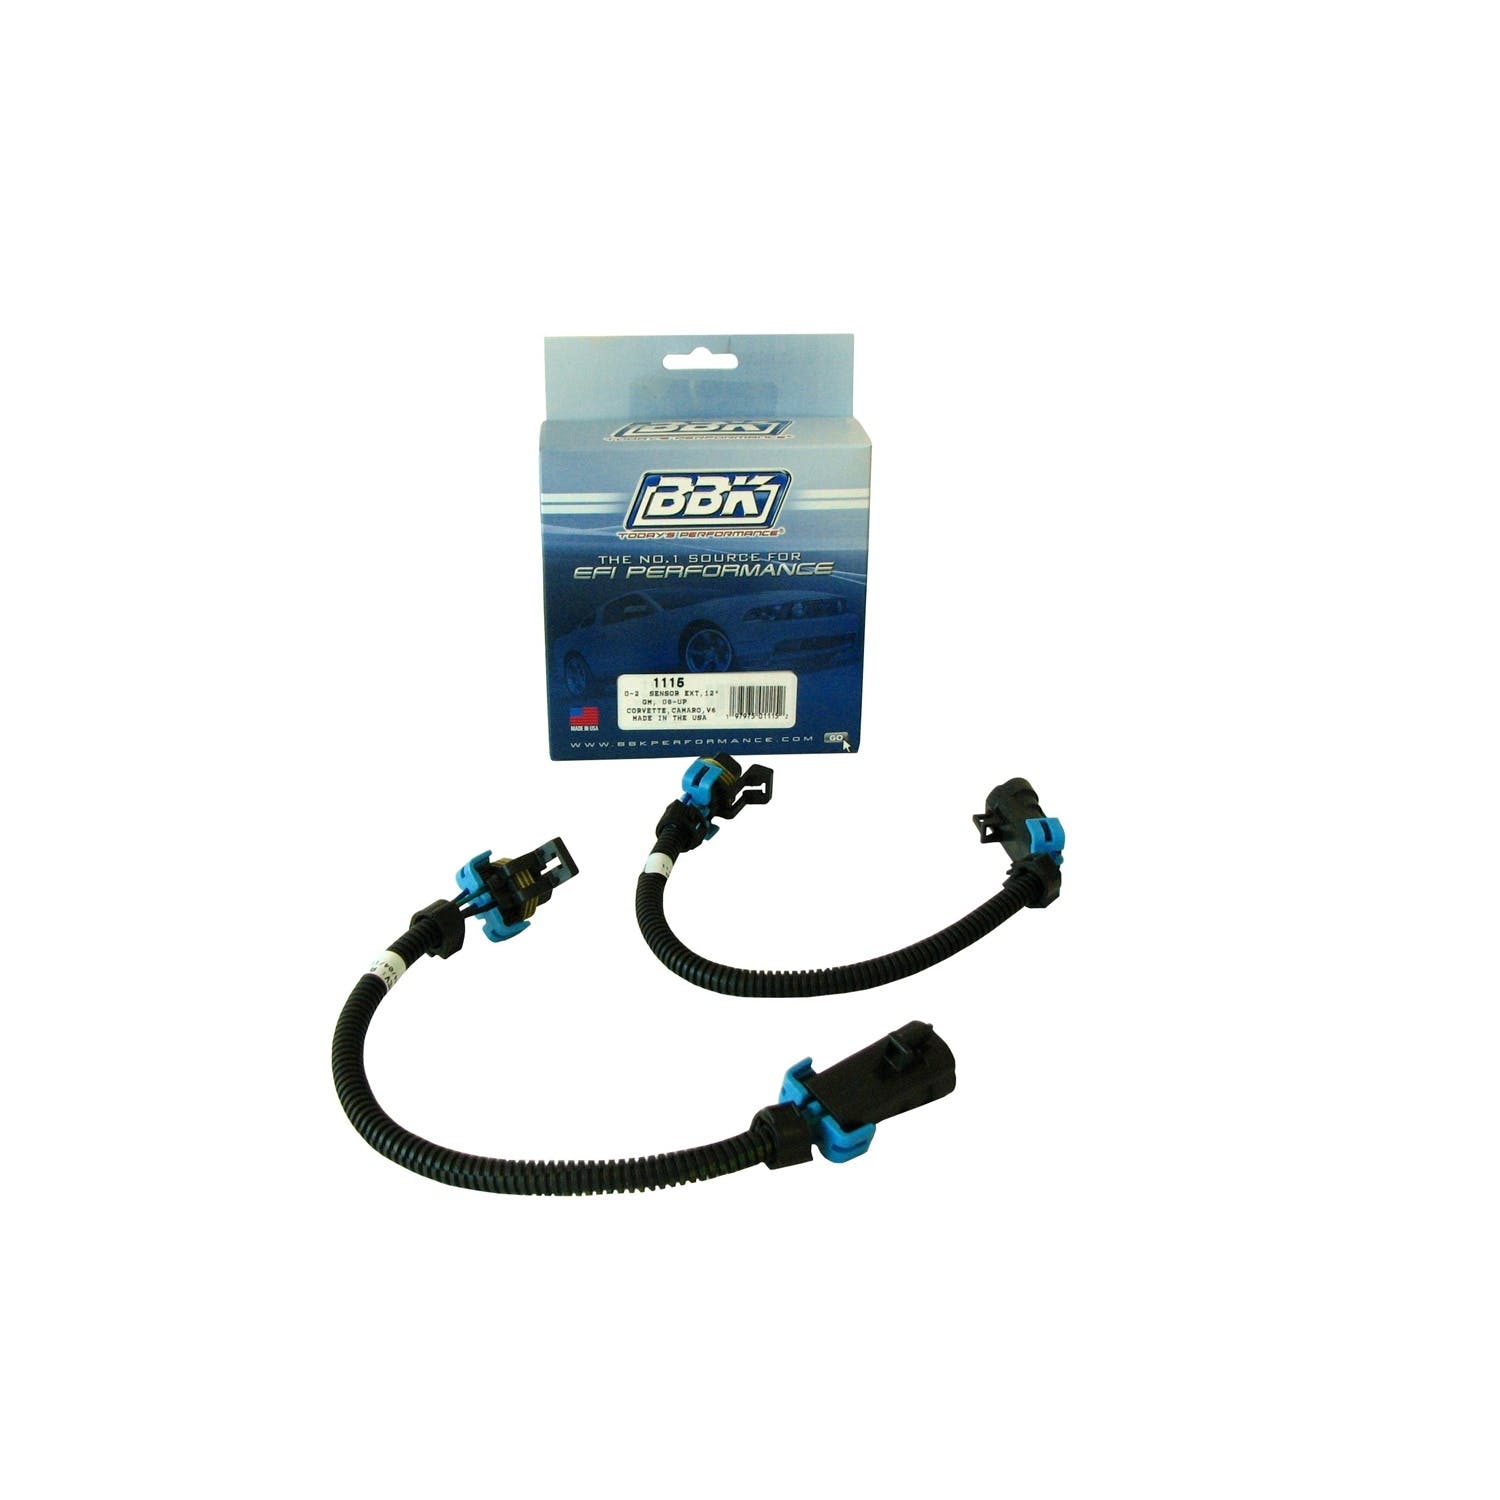 BBK Performance Parts 1115 O2 Sensor Wire Extension Harness